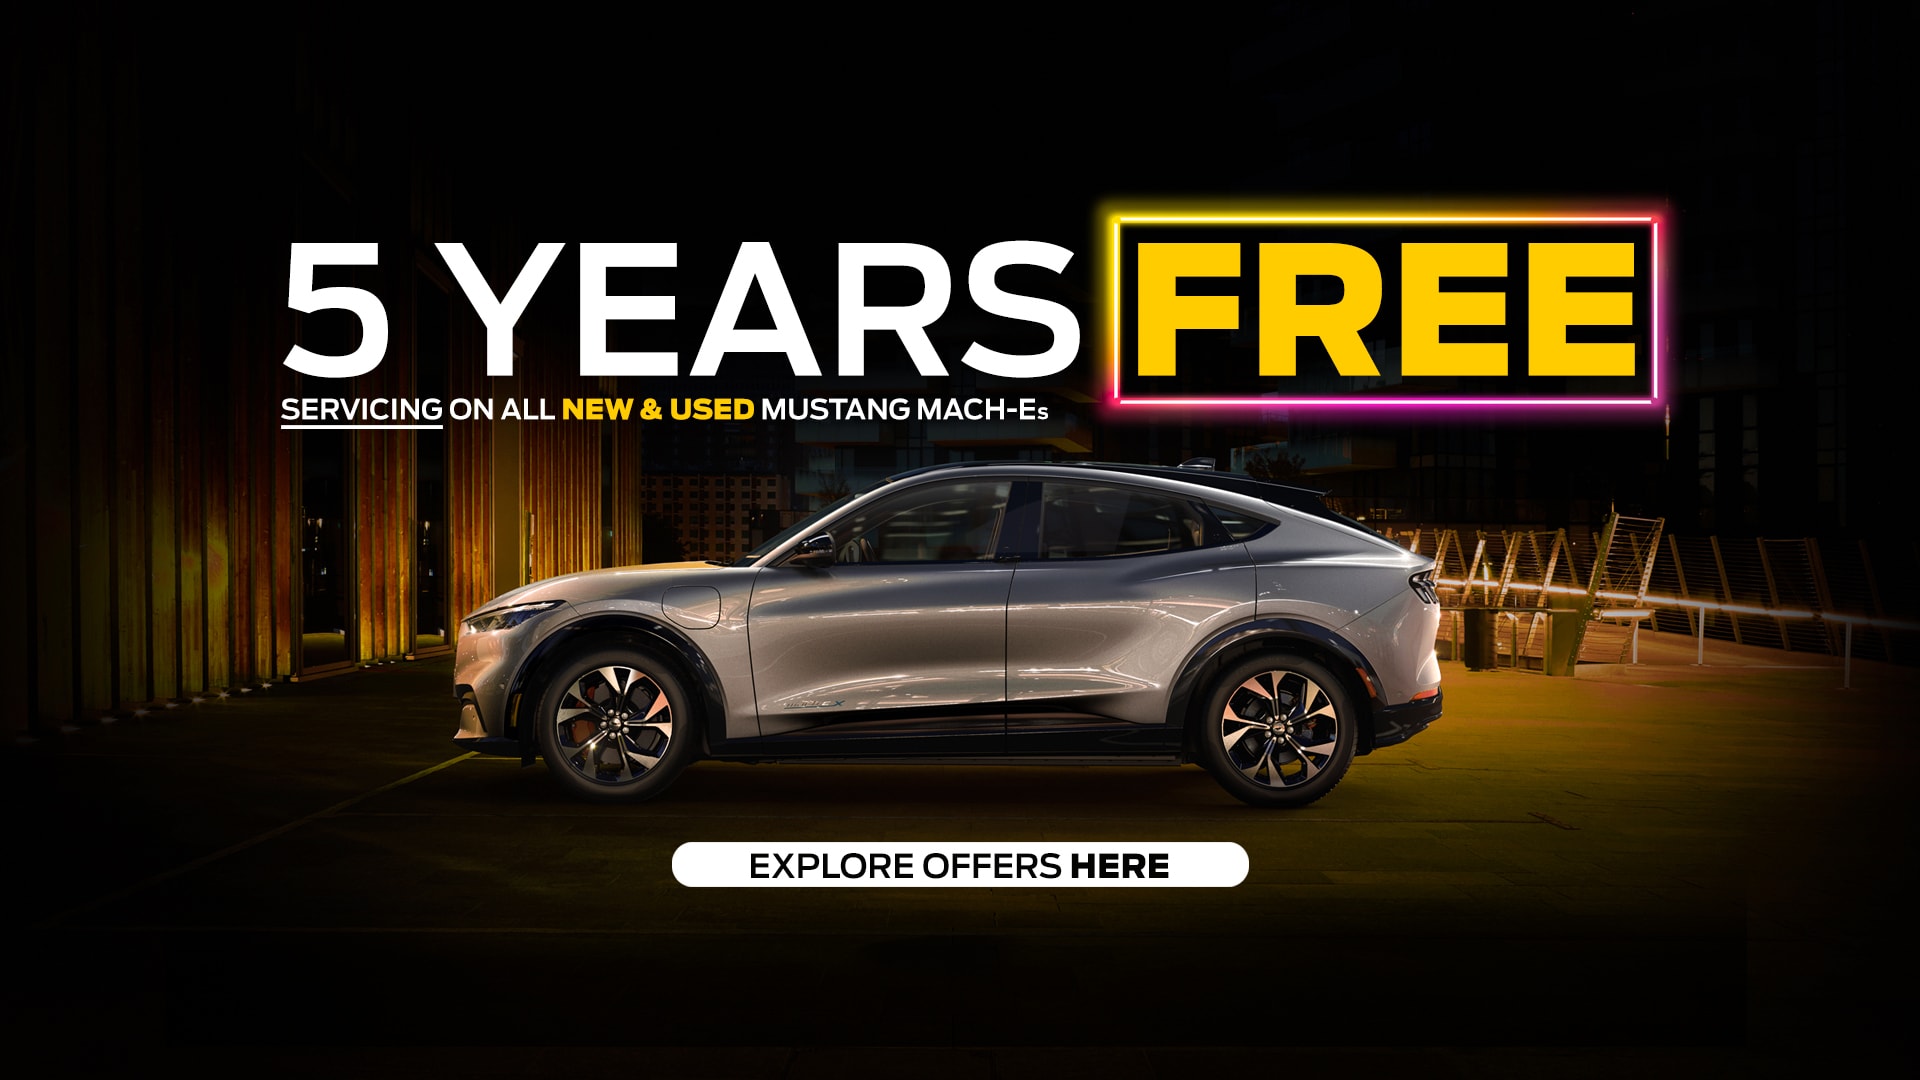 Mustang Mach-E 5 Years Free Servicing